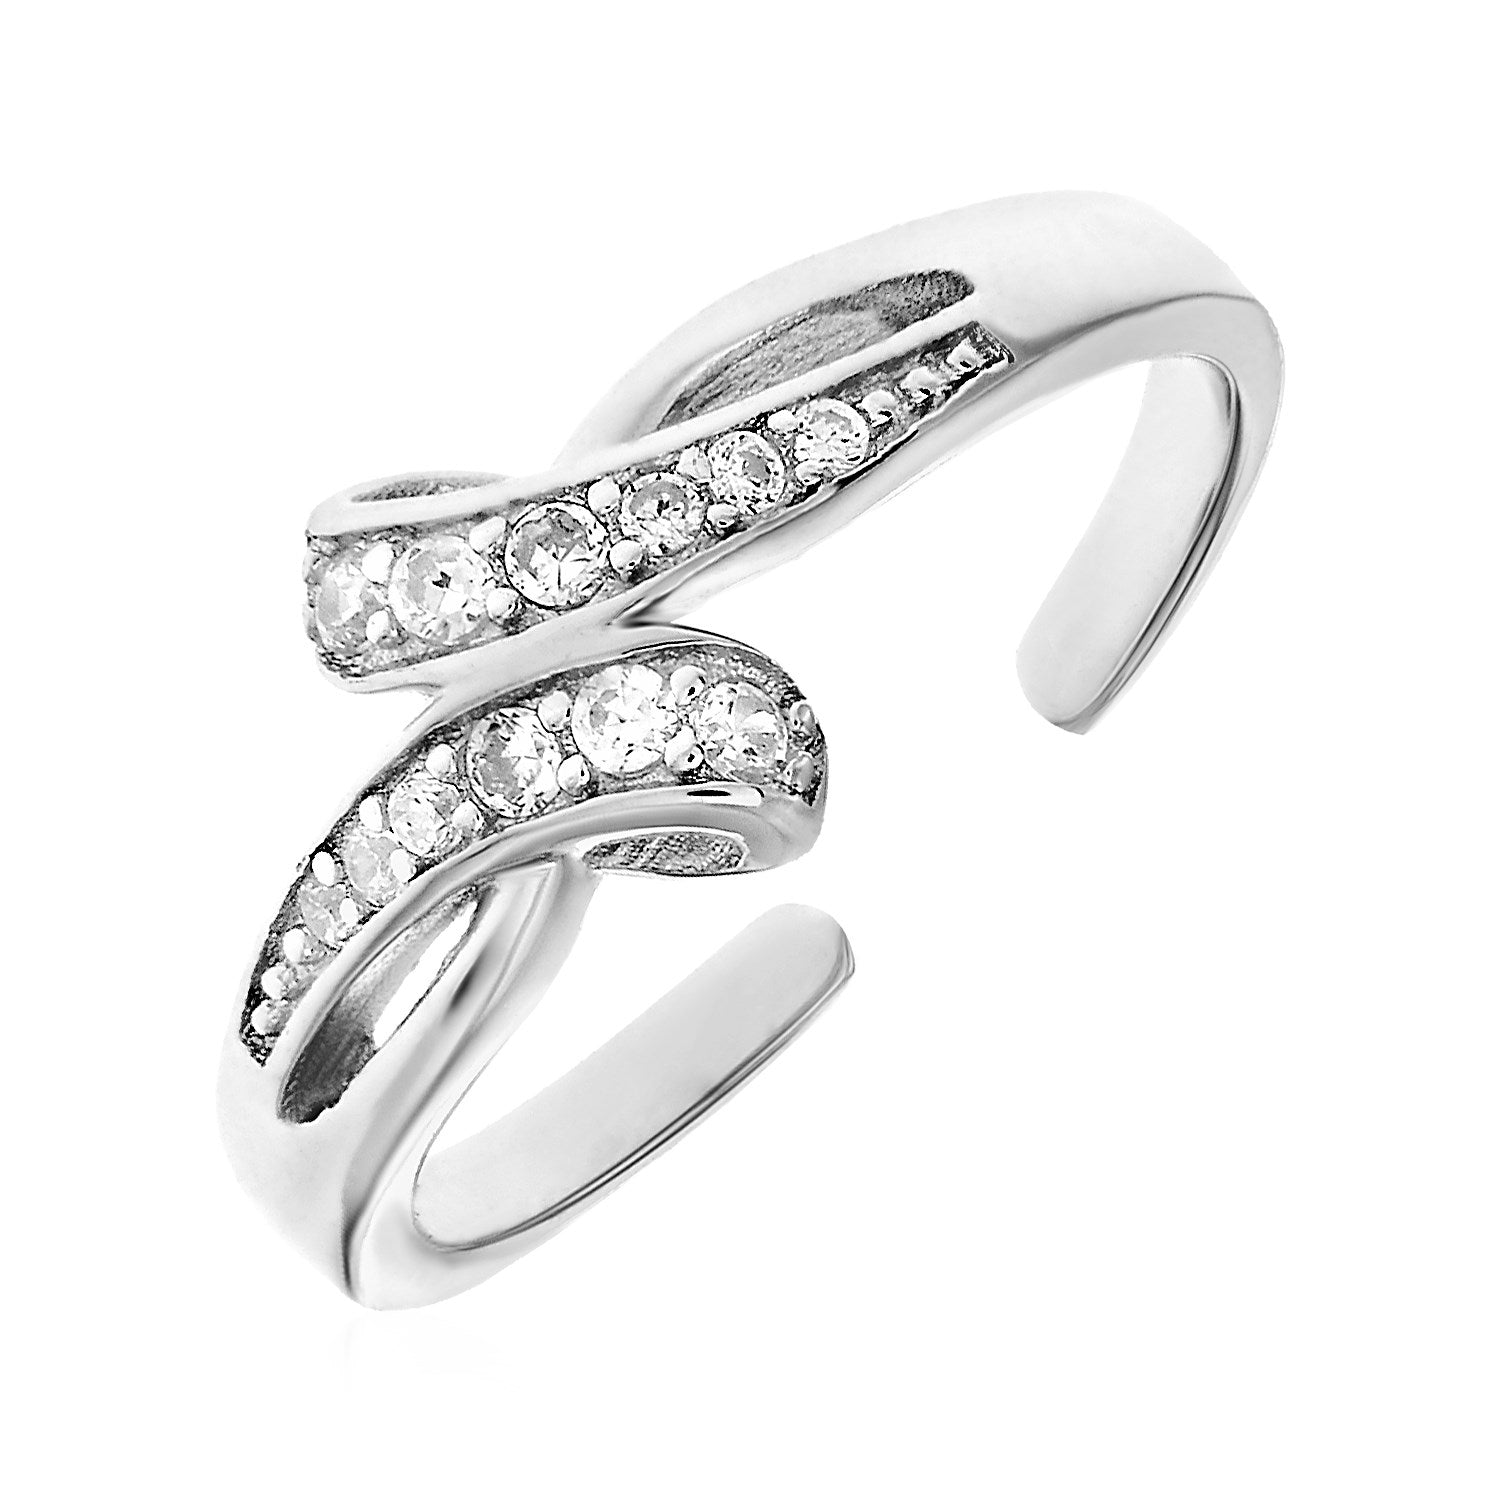 Toe Ring with Bypass Motif in Sterling Silver with Cubic Zirconia